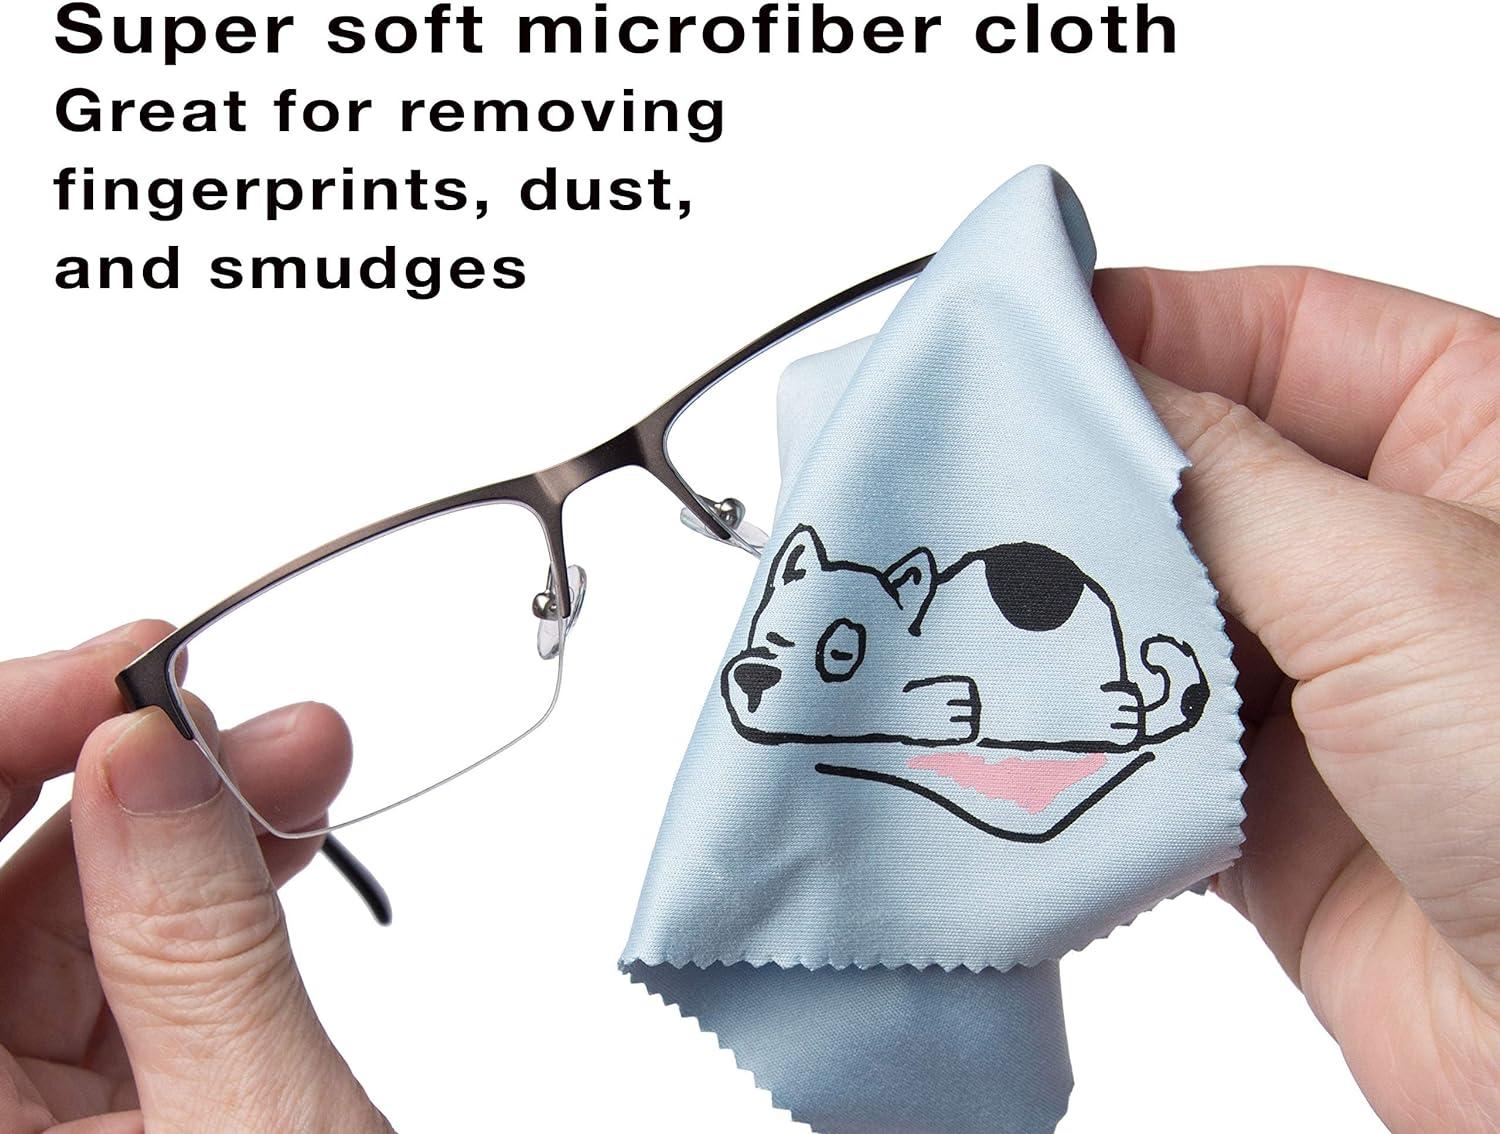 Microfiber Cleaning Cloth - Microfiber Cloth Fabric Wipe for